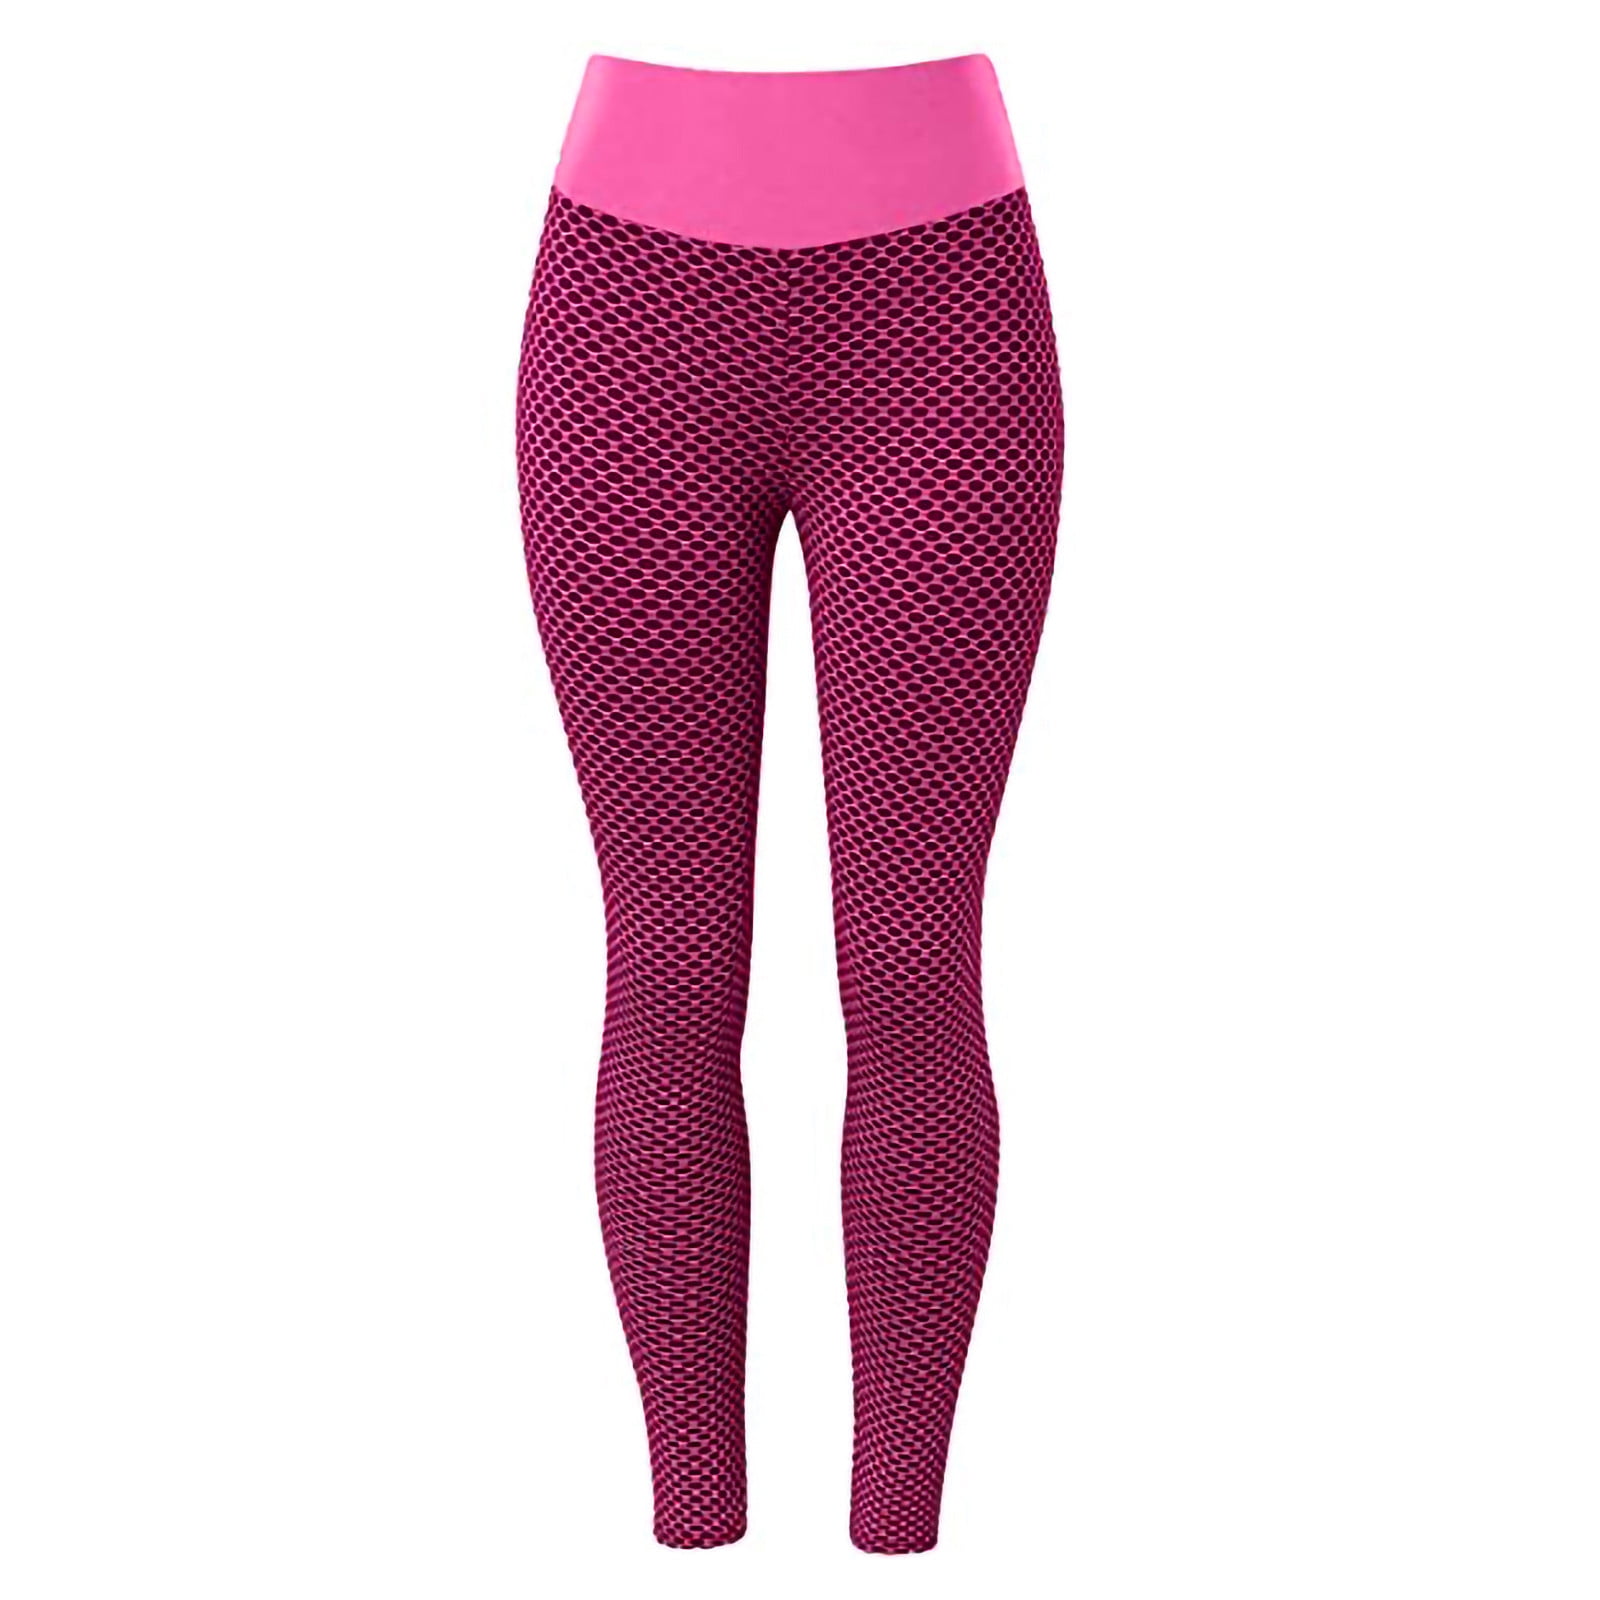 Yoga Pants for Women with Bowknot Running Leggings Elastic High Waisted Tummy Control No Trace Non Deformable 